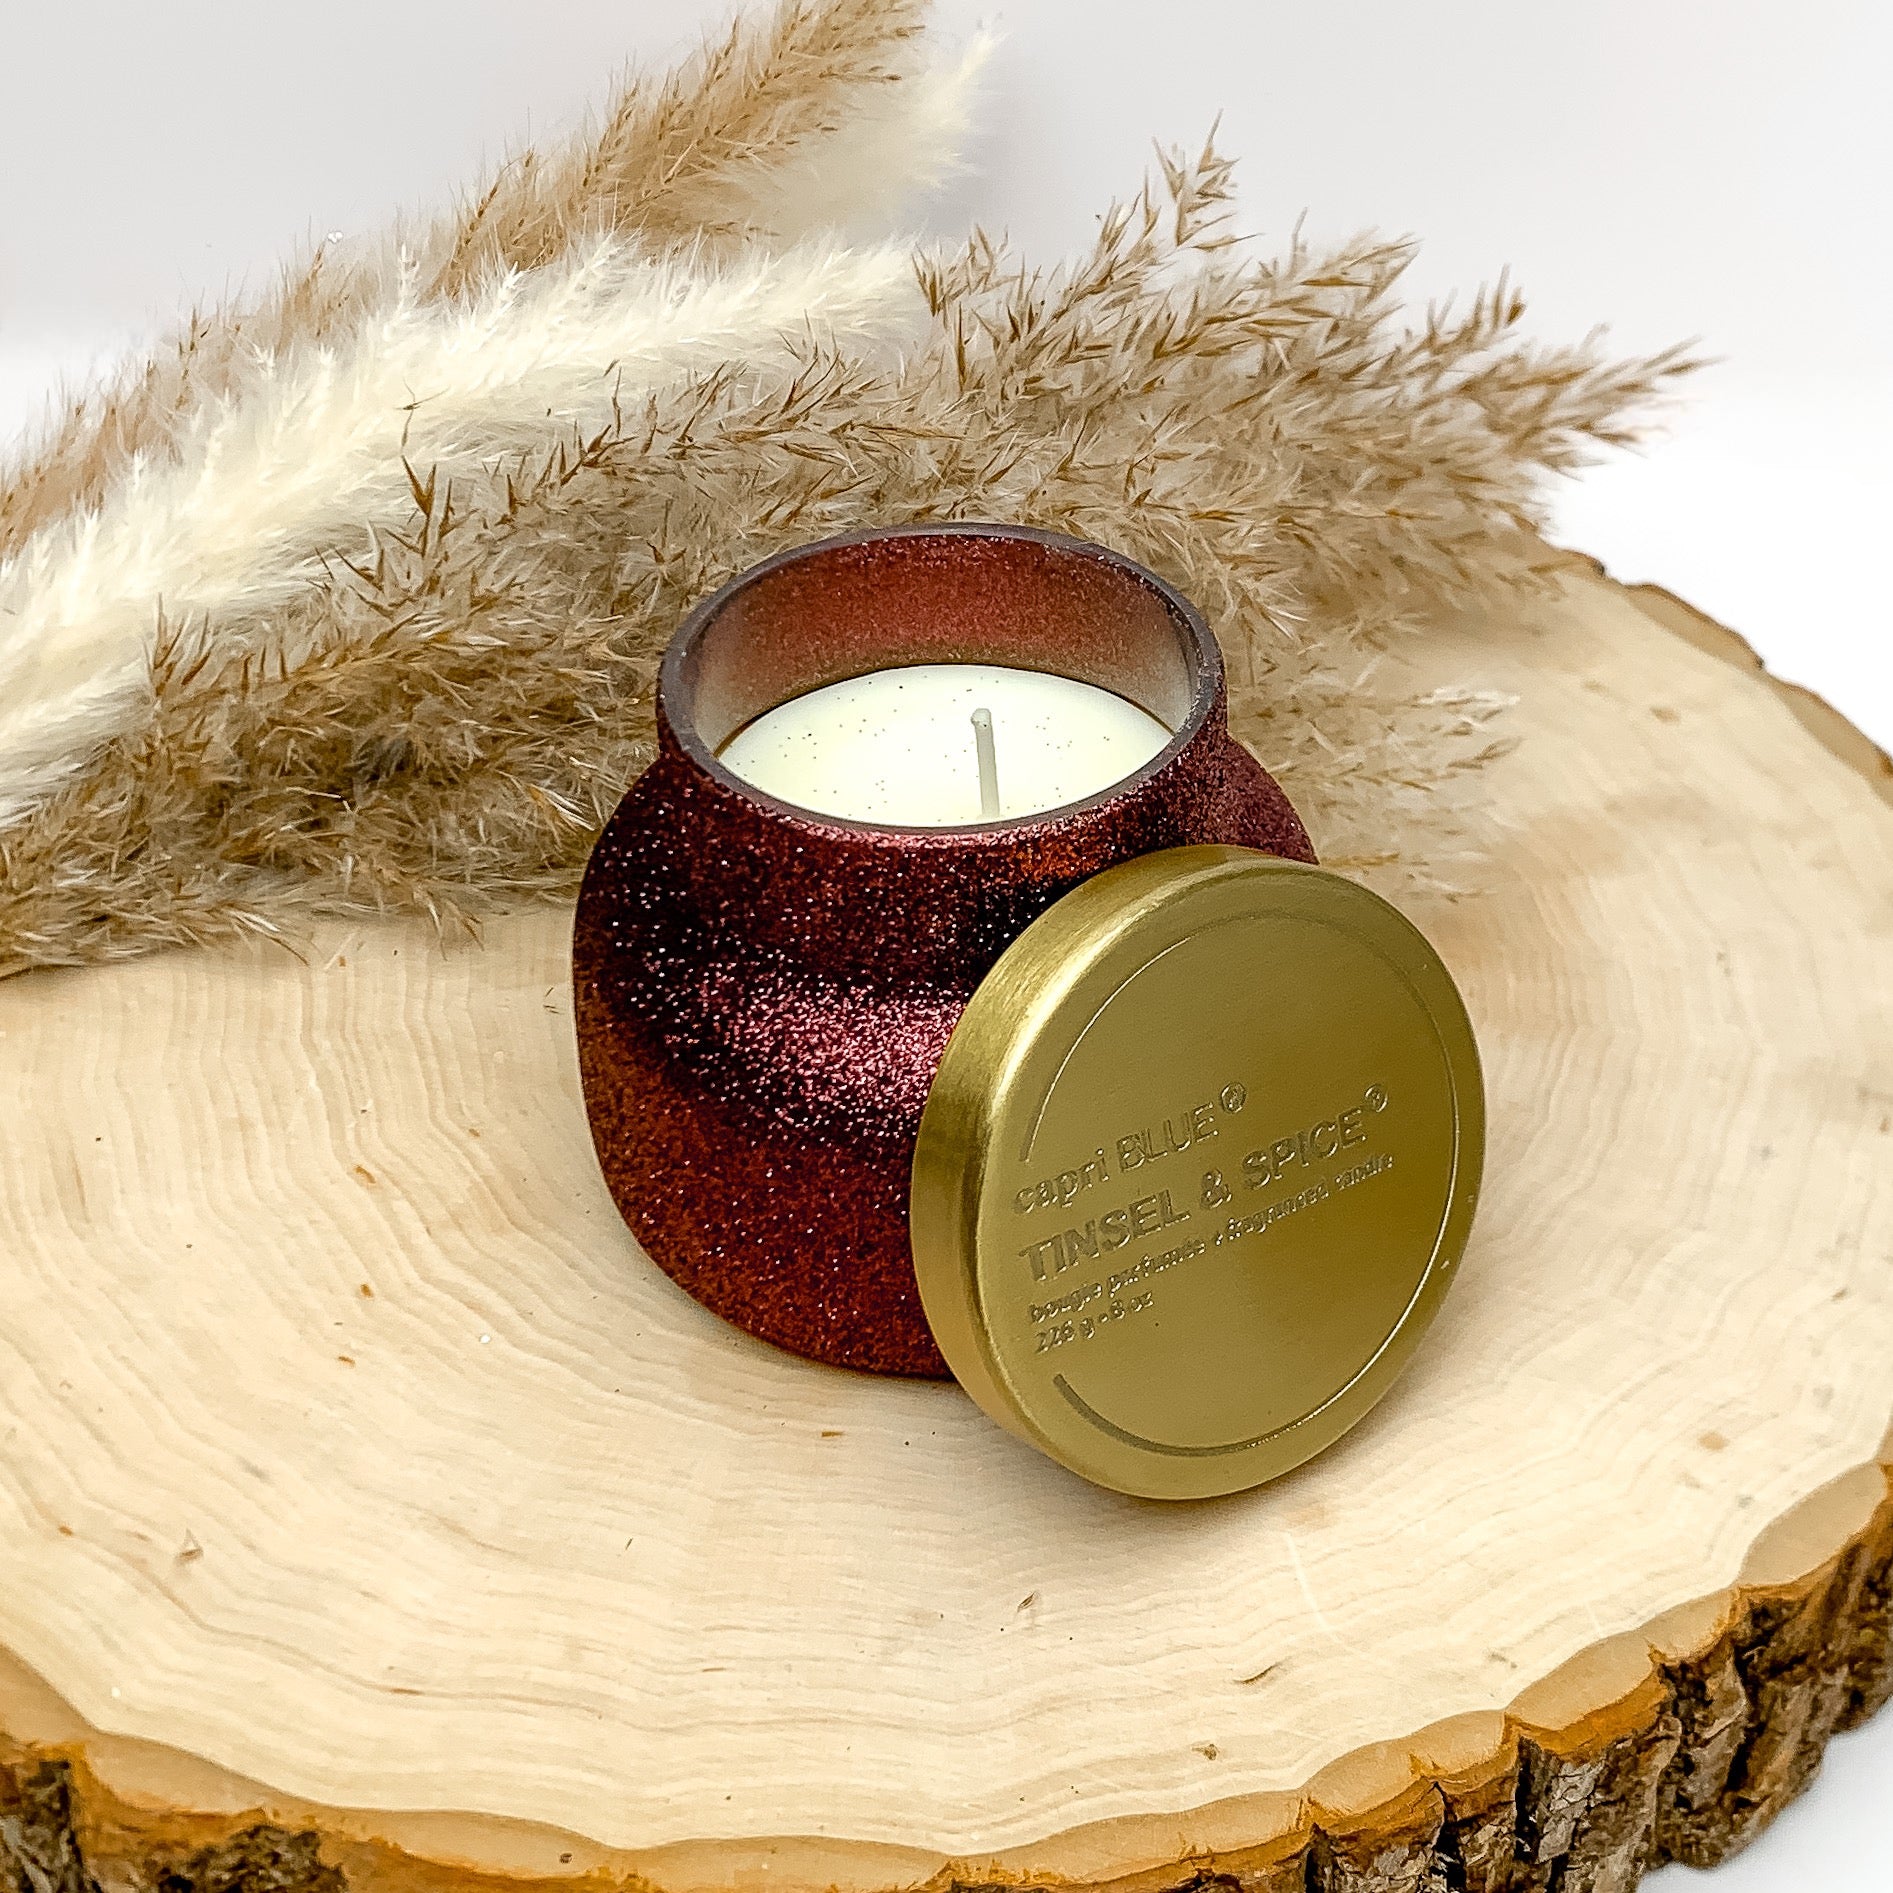 Capri Blue | 19 oz. Jar Candle in Maroon Glitter | Tinsel & Spice - Giddy Up Glamour Boutique